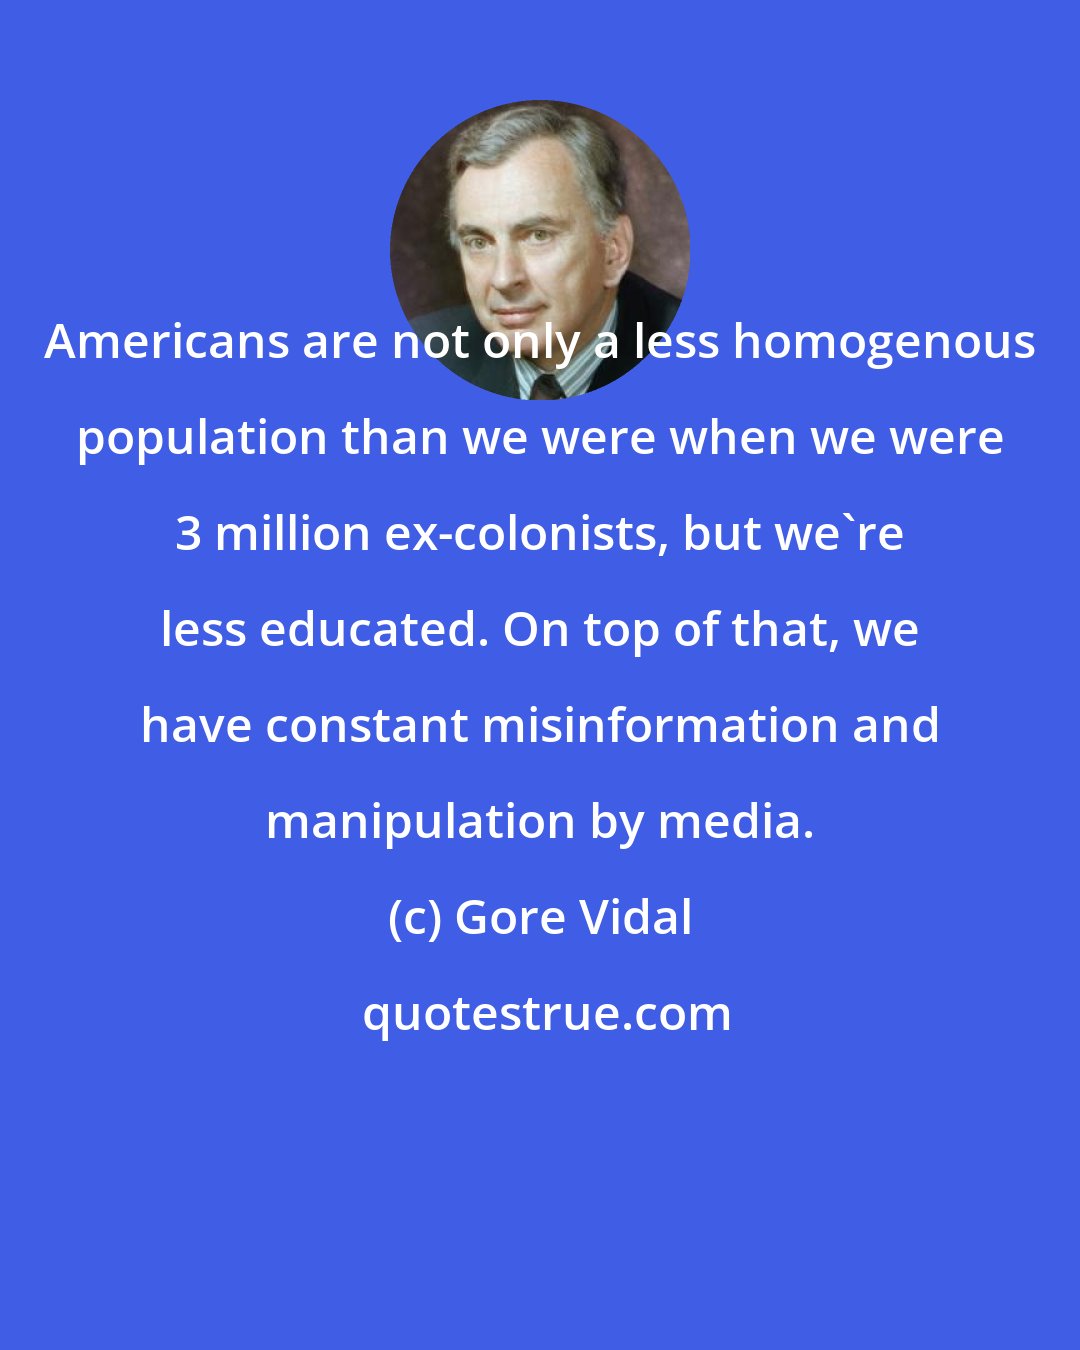 Gore Vidal: Americans are not only a less homogenous population than we were when we were 3 million ex-colonists, but we're less educated. On top of that, we have constant misinformation and manipulation by media.